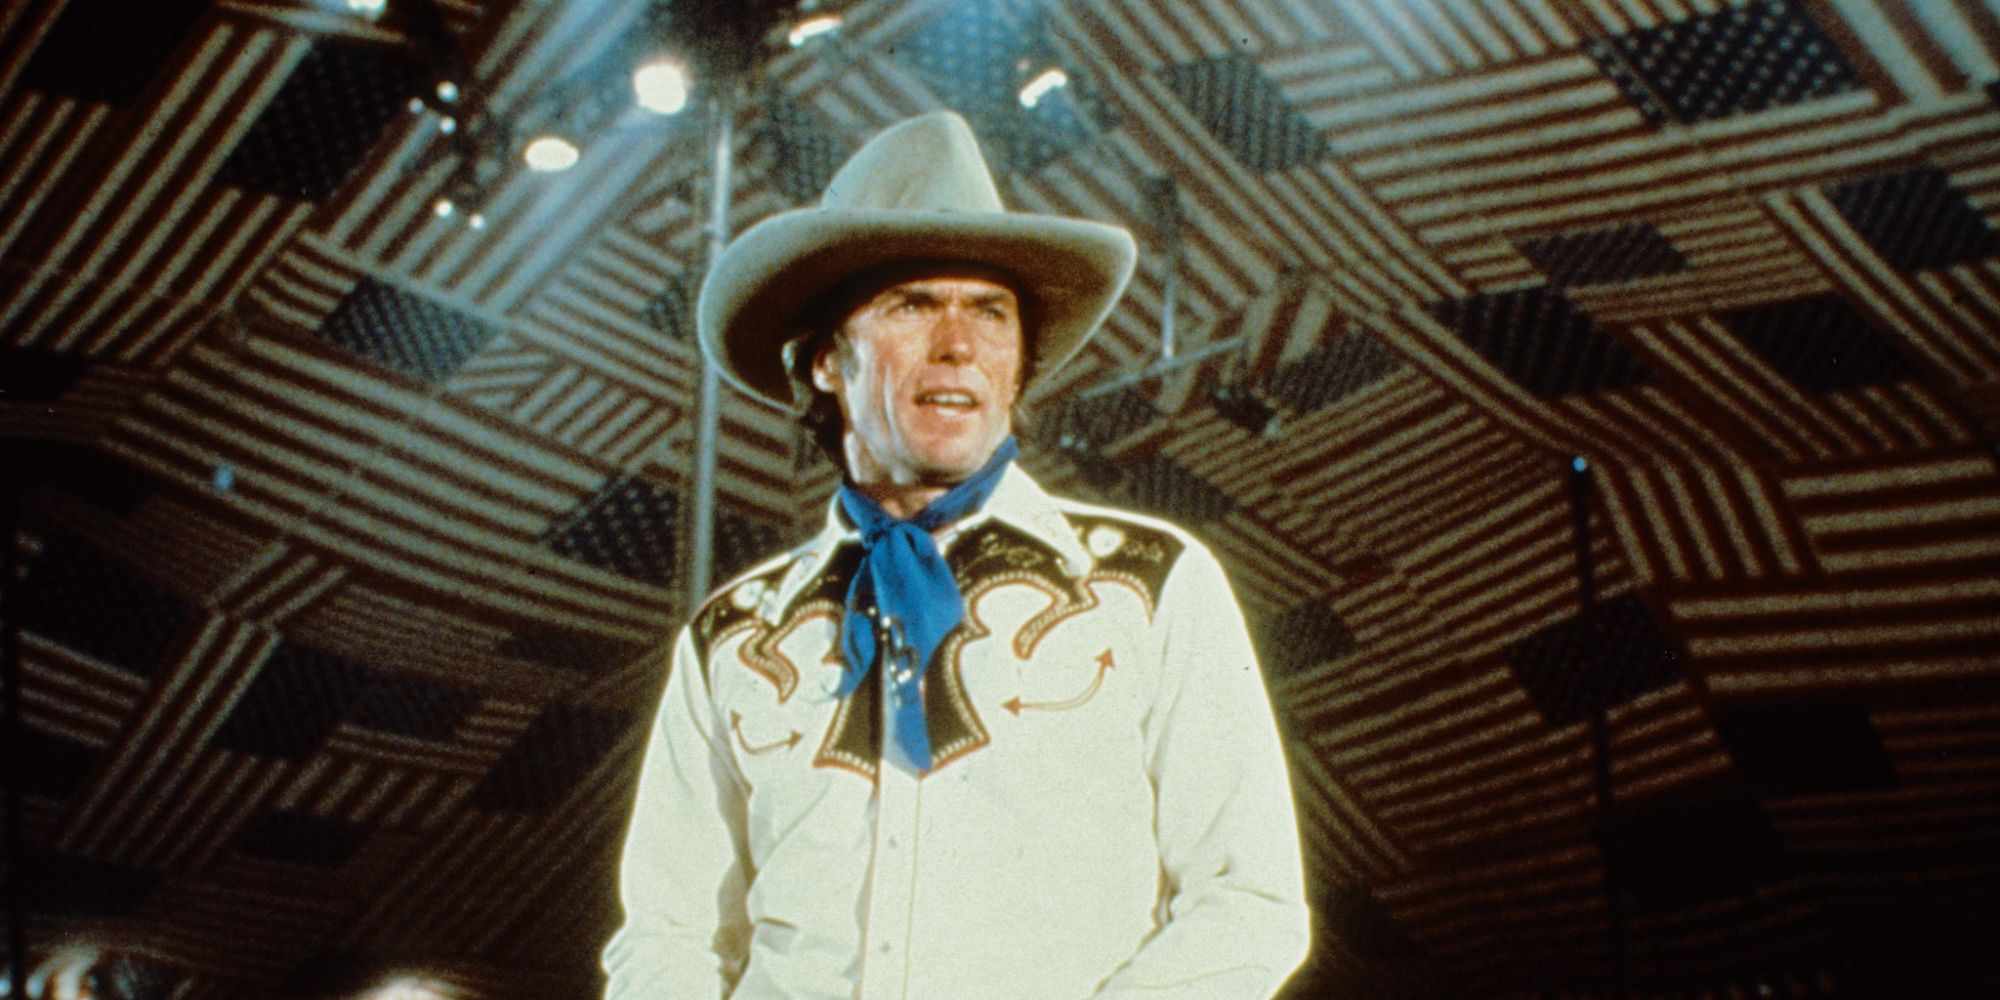 bronco billy clint eastwood doing rodeo in a western hat